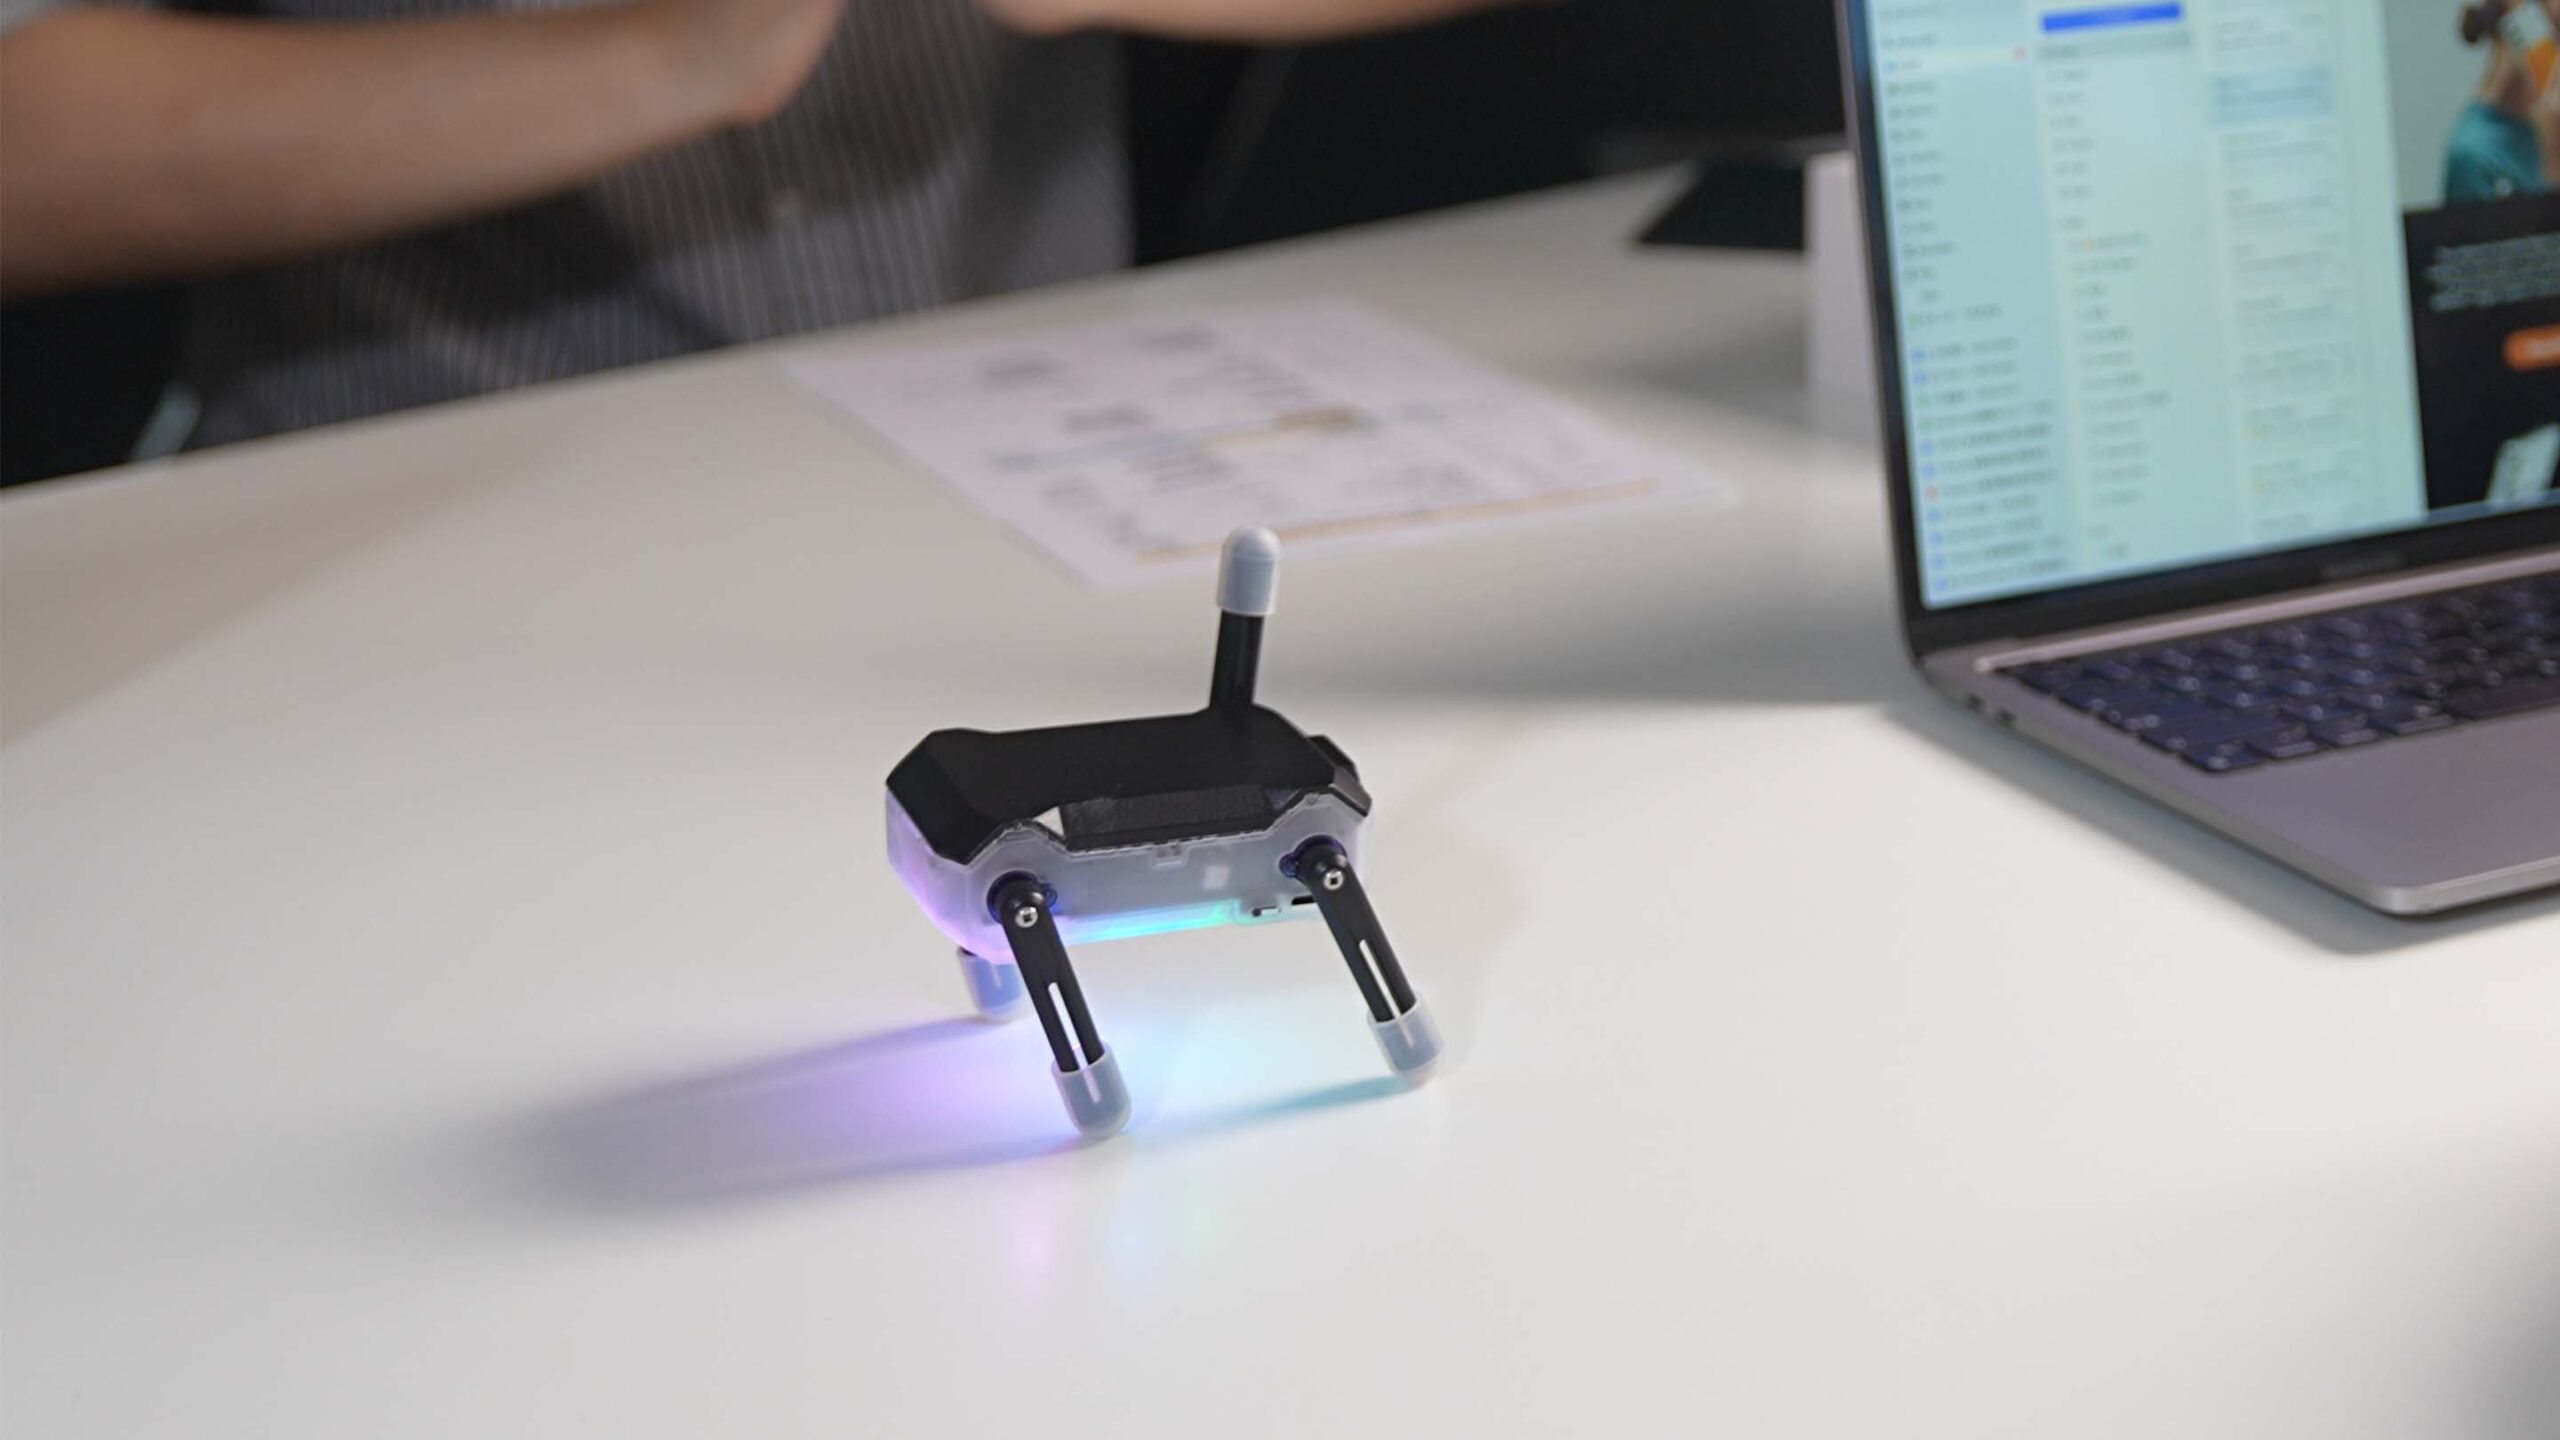 Robots-Weblog | KT2 Kungfu Turtle: Selling STEM-Based mostly Studying with the Launch of a Reducing-Edge Pocket-Sized Desktop Robotic